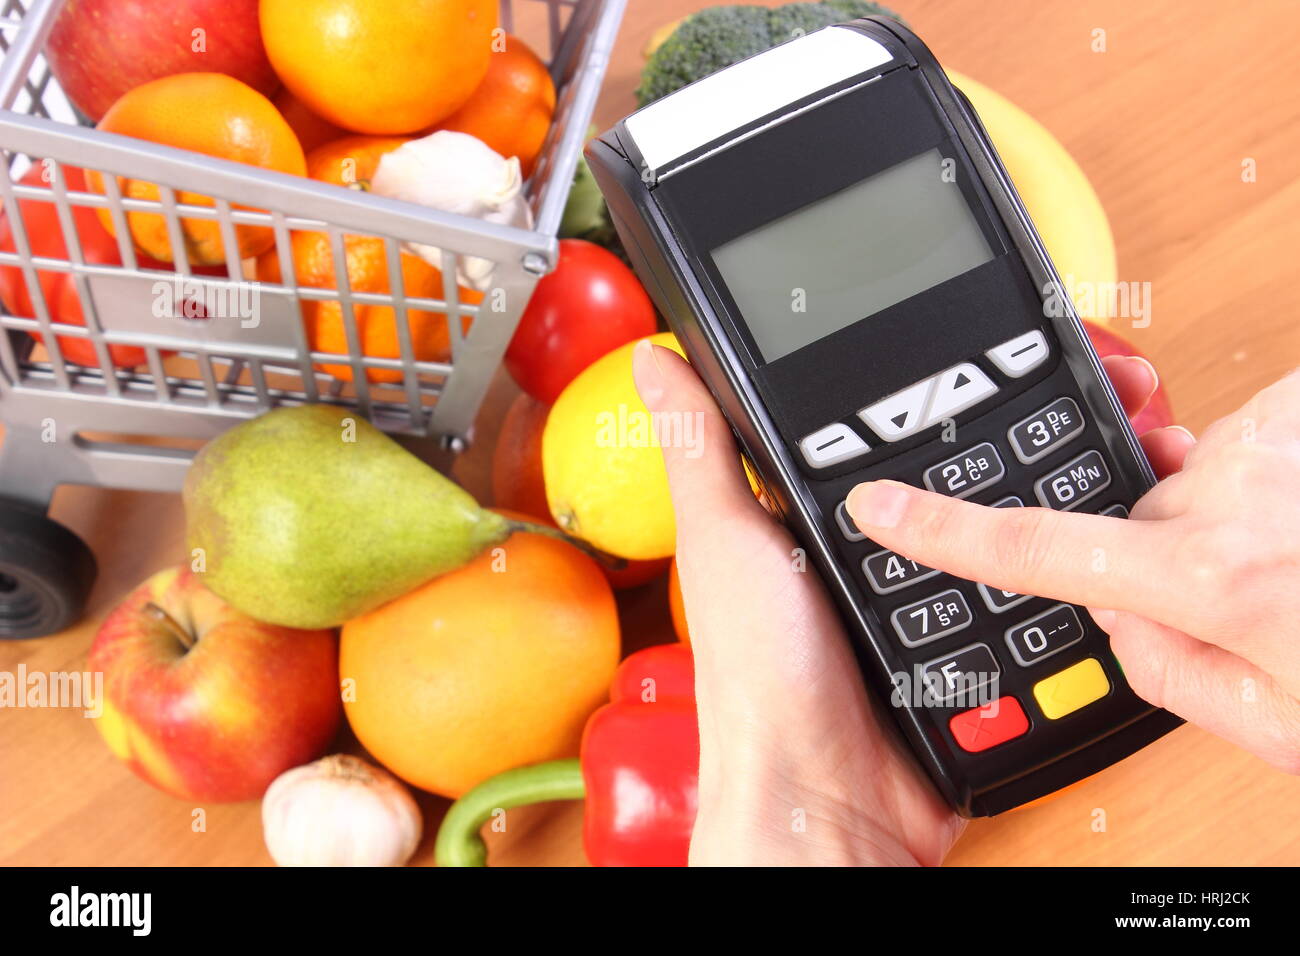 Hand of woman using payment terminal, enter personal identification number, credit card reader and fresh fruits and vegetables with plastic shopping c Stock Photo